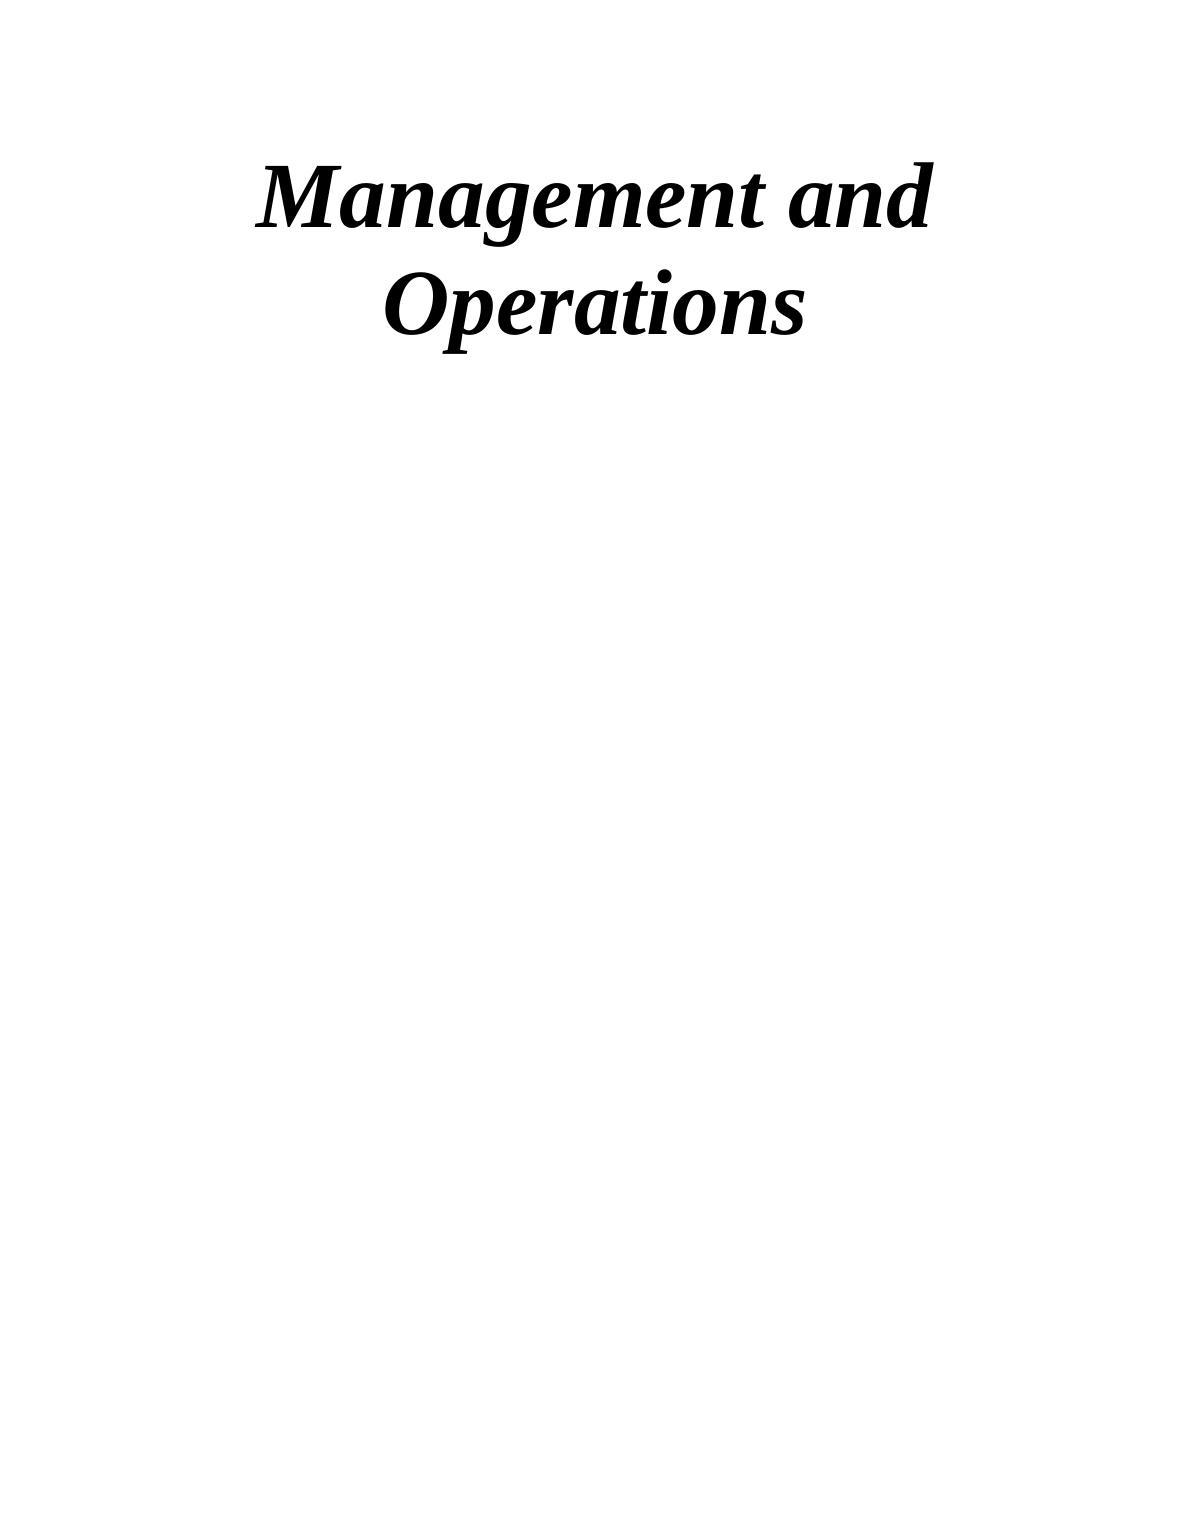 Management and Operations Assignment : Tesco Plc_1